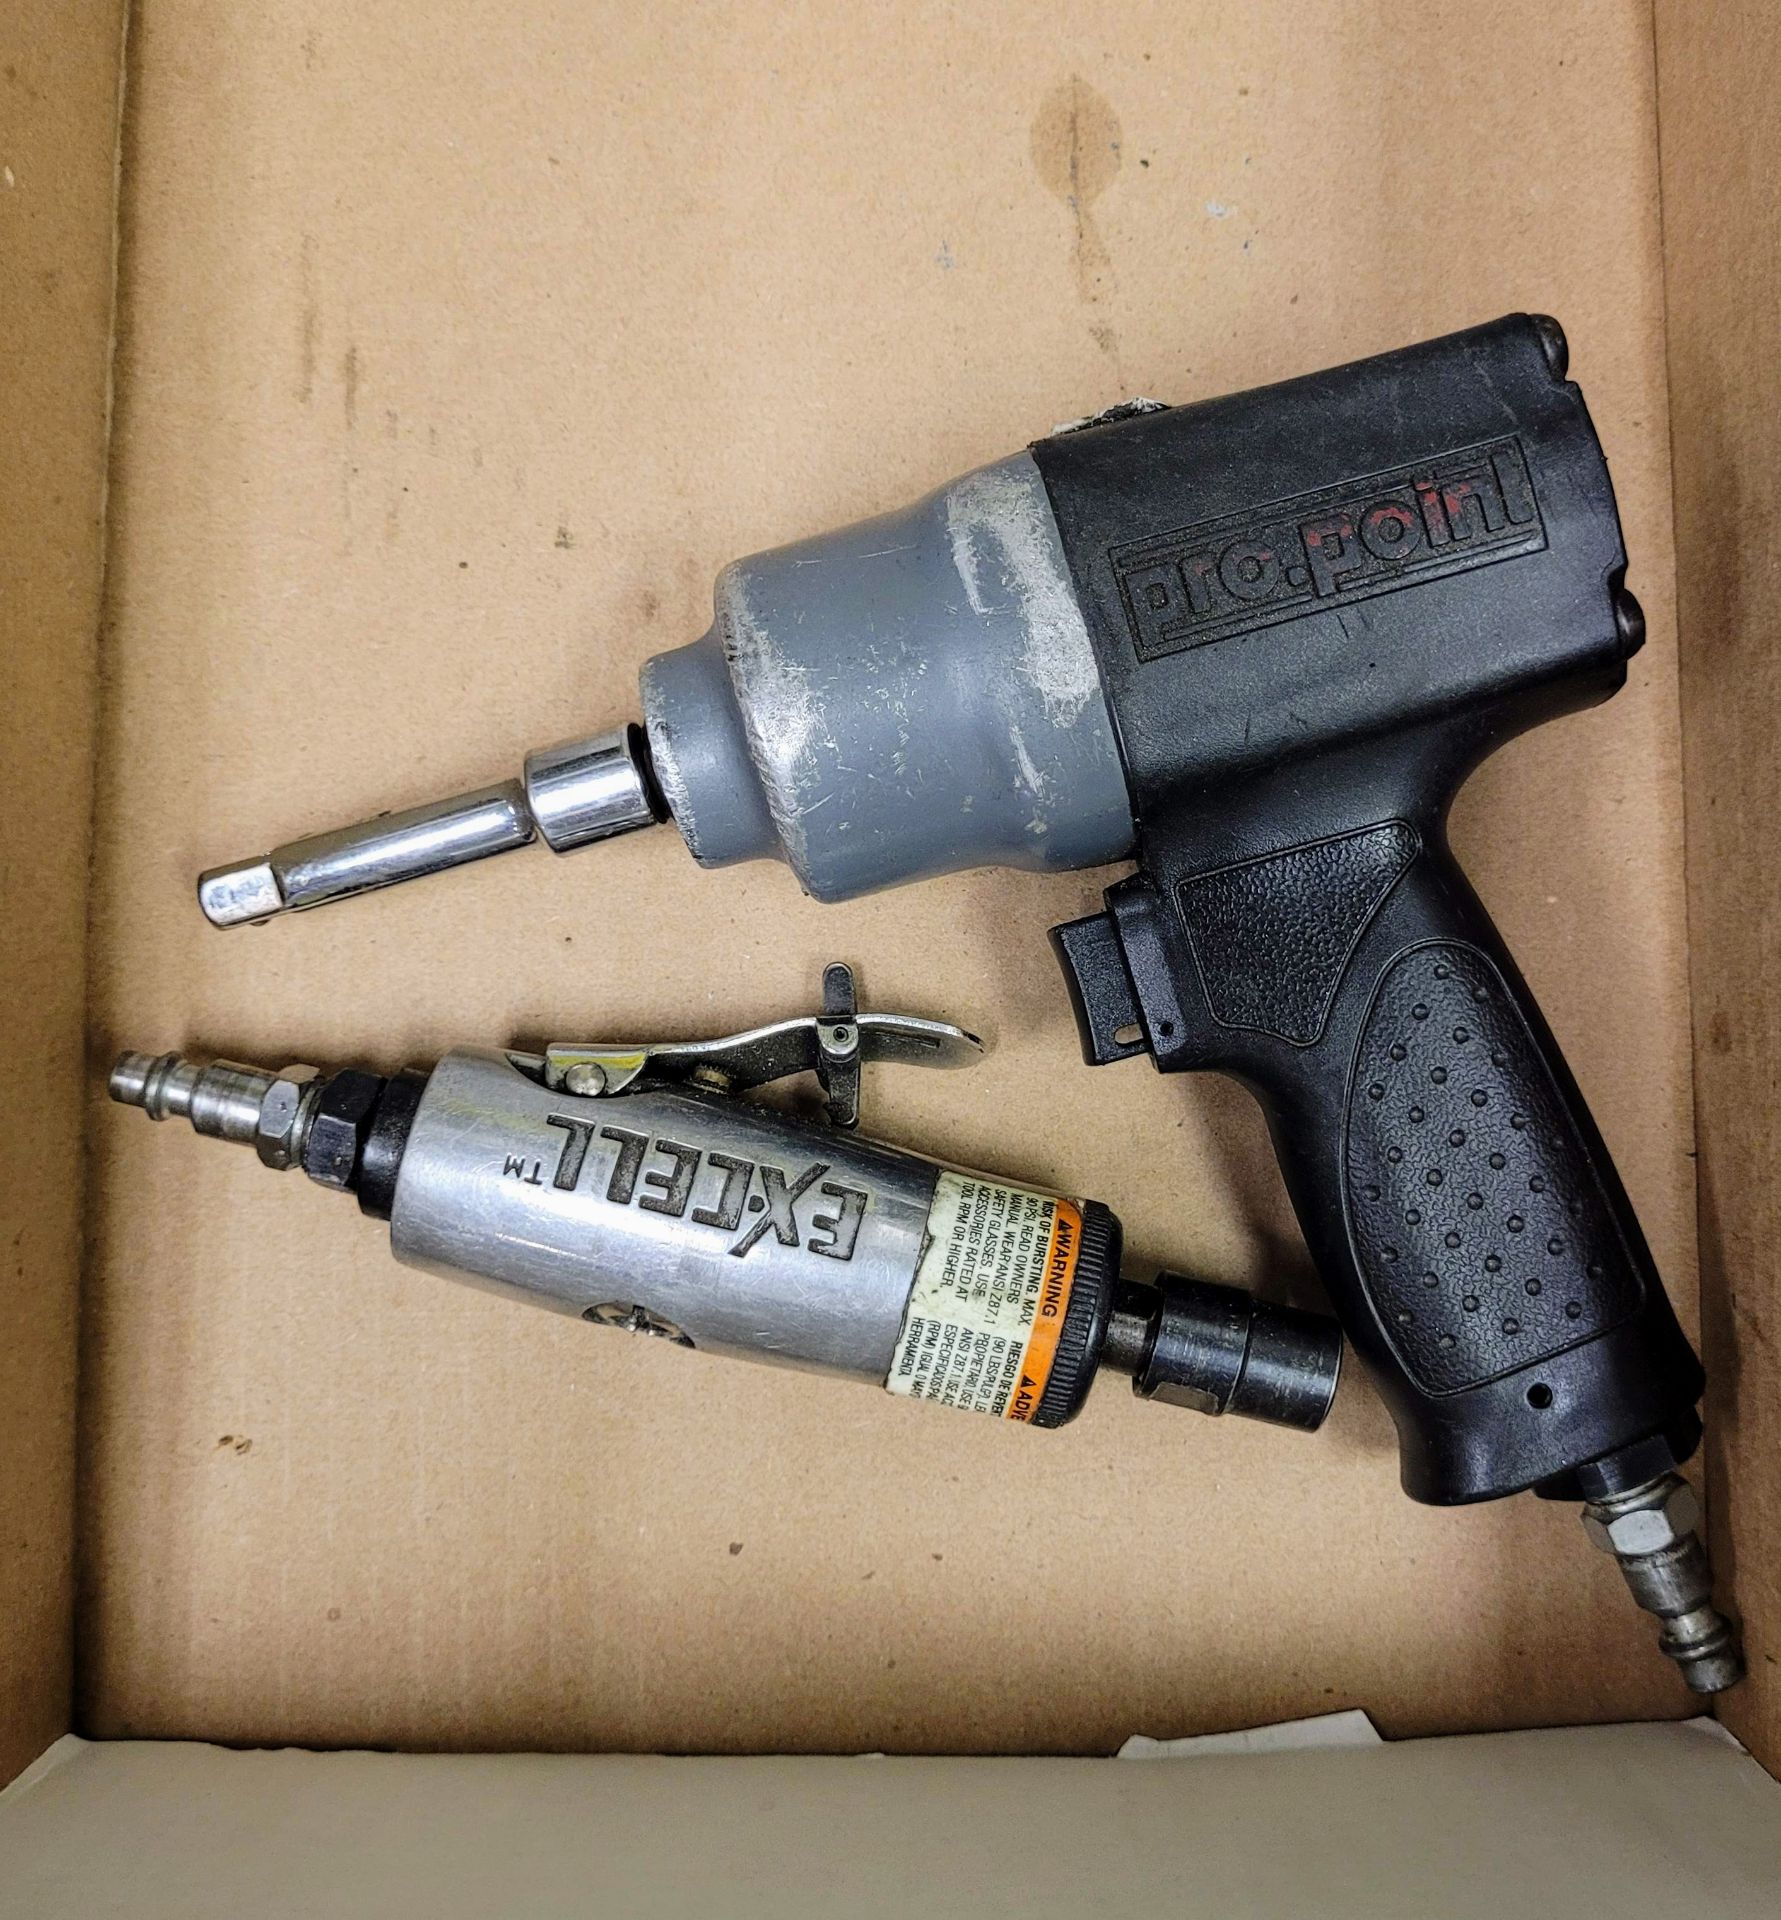 LOT - PRO POINT AIR IMPACT WRENCH W/ DREMEL - Image 2 of 2